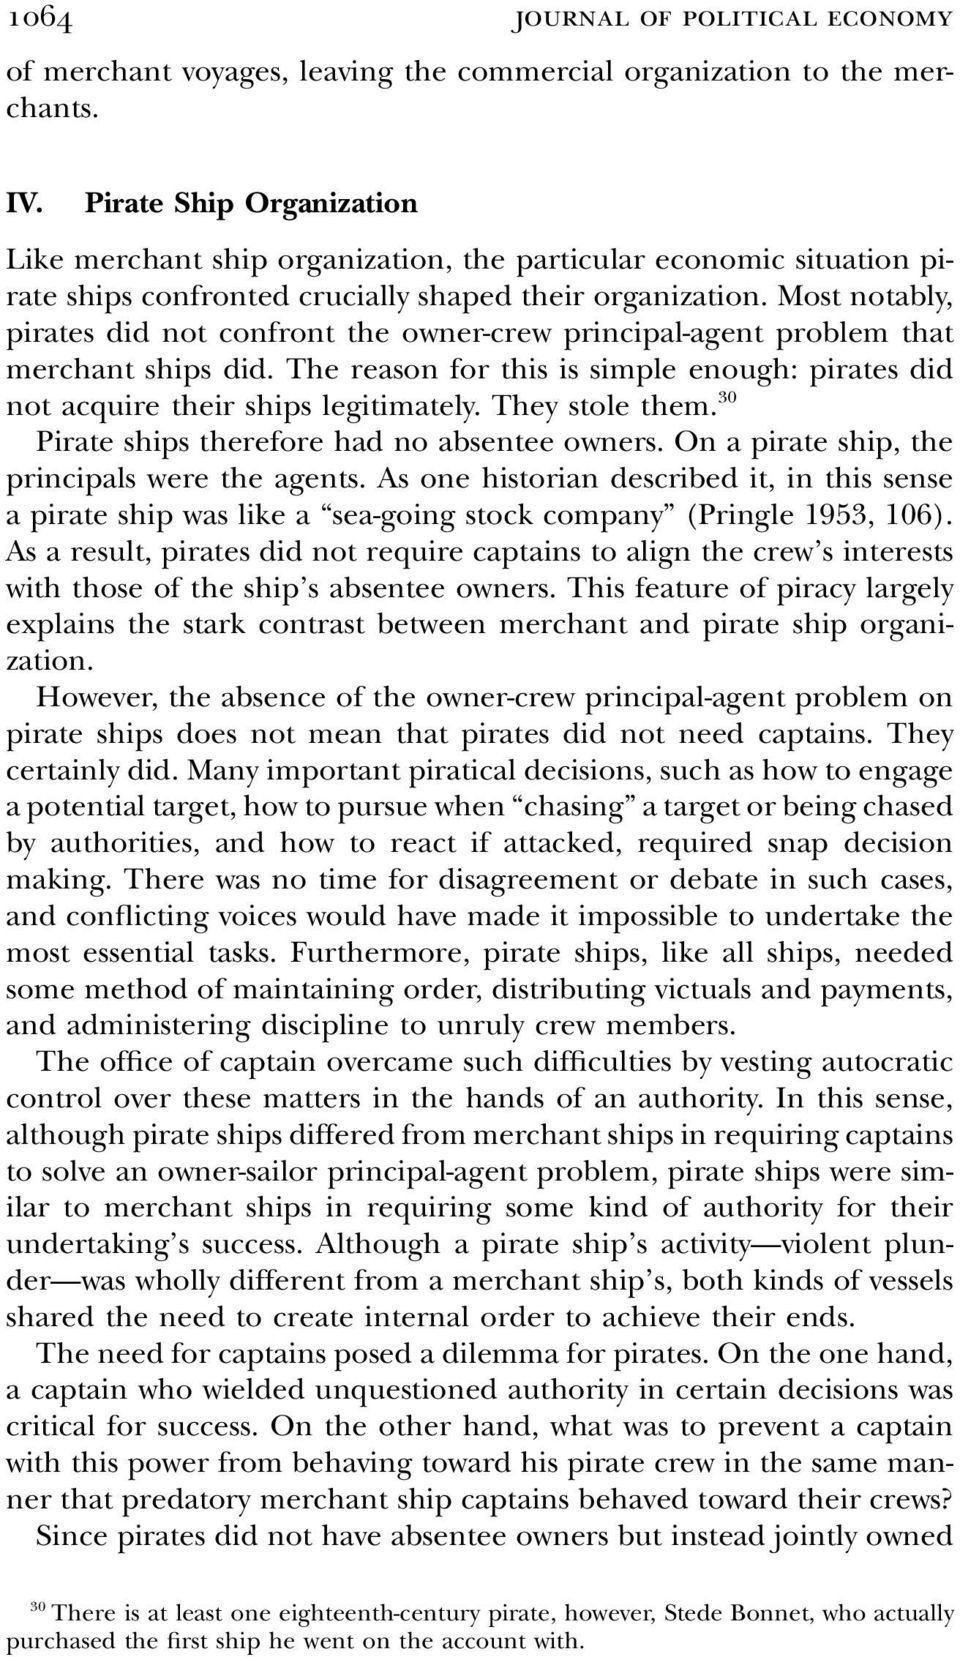 Most notably, pirates did not confront the owner-crew principal-agent problem that merchant ships did. The reason for this is simple enough: pirates did not acquire their ships legitimately.